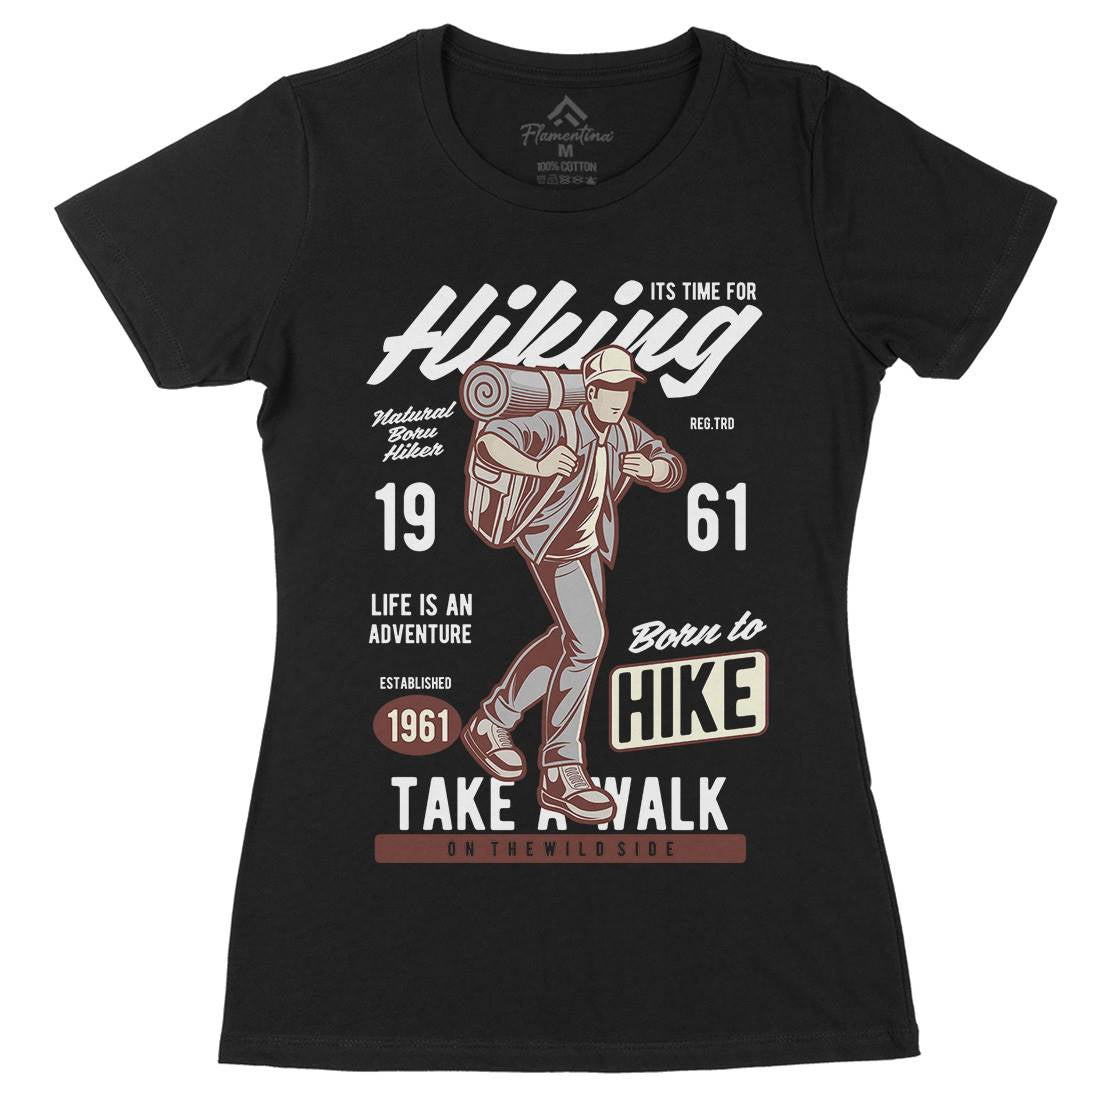 Its Time For Hiking Womens Organic Crew Neck T-Shirt Nature C382